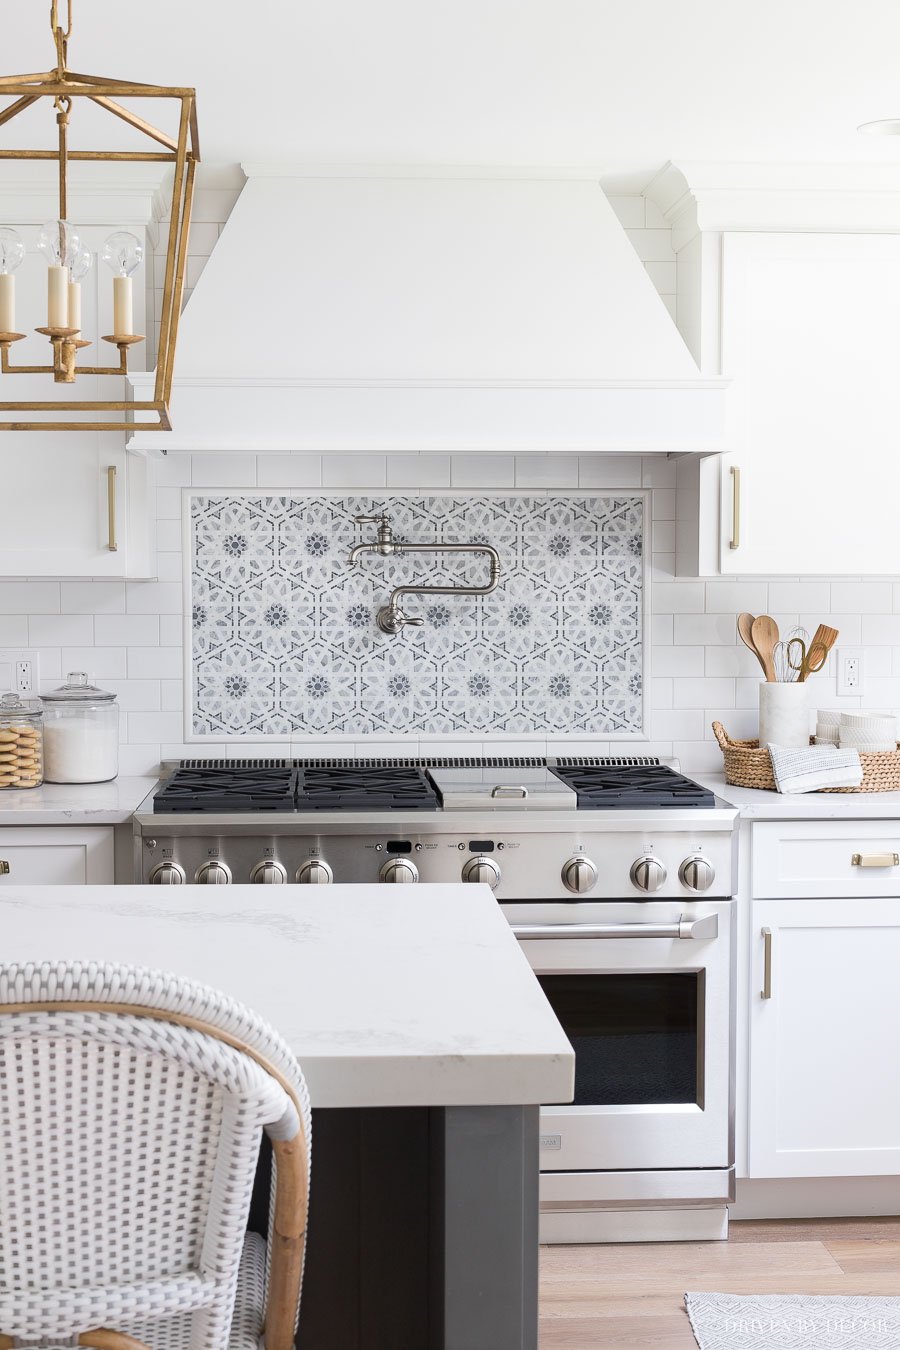 white subway tile with patterned tile pattern over the stove